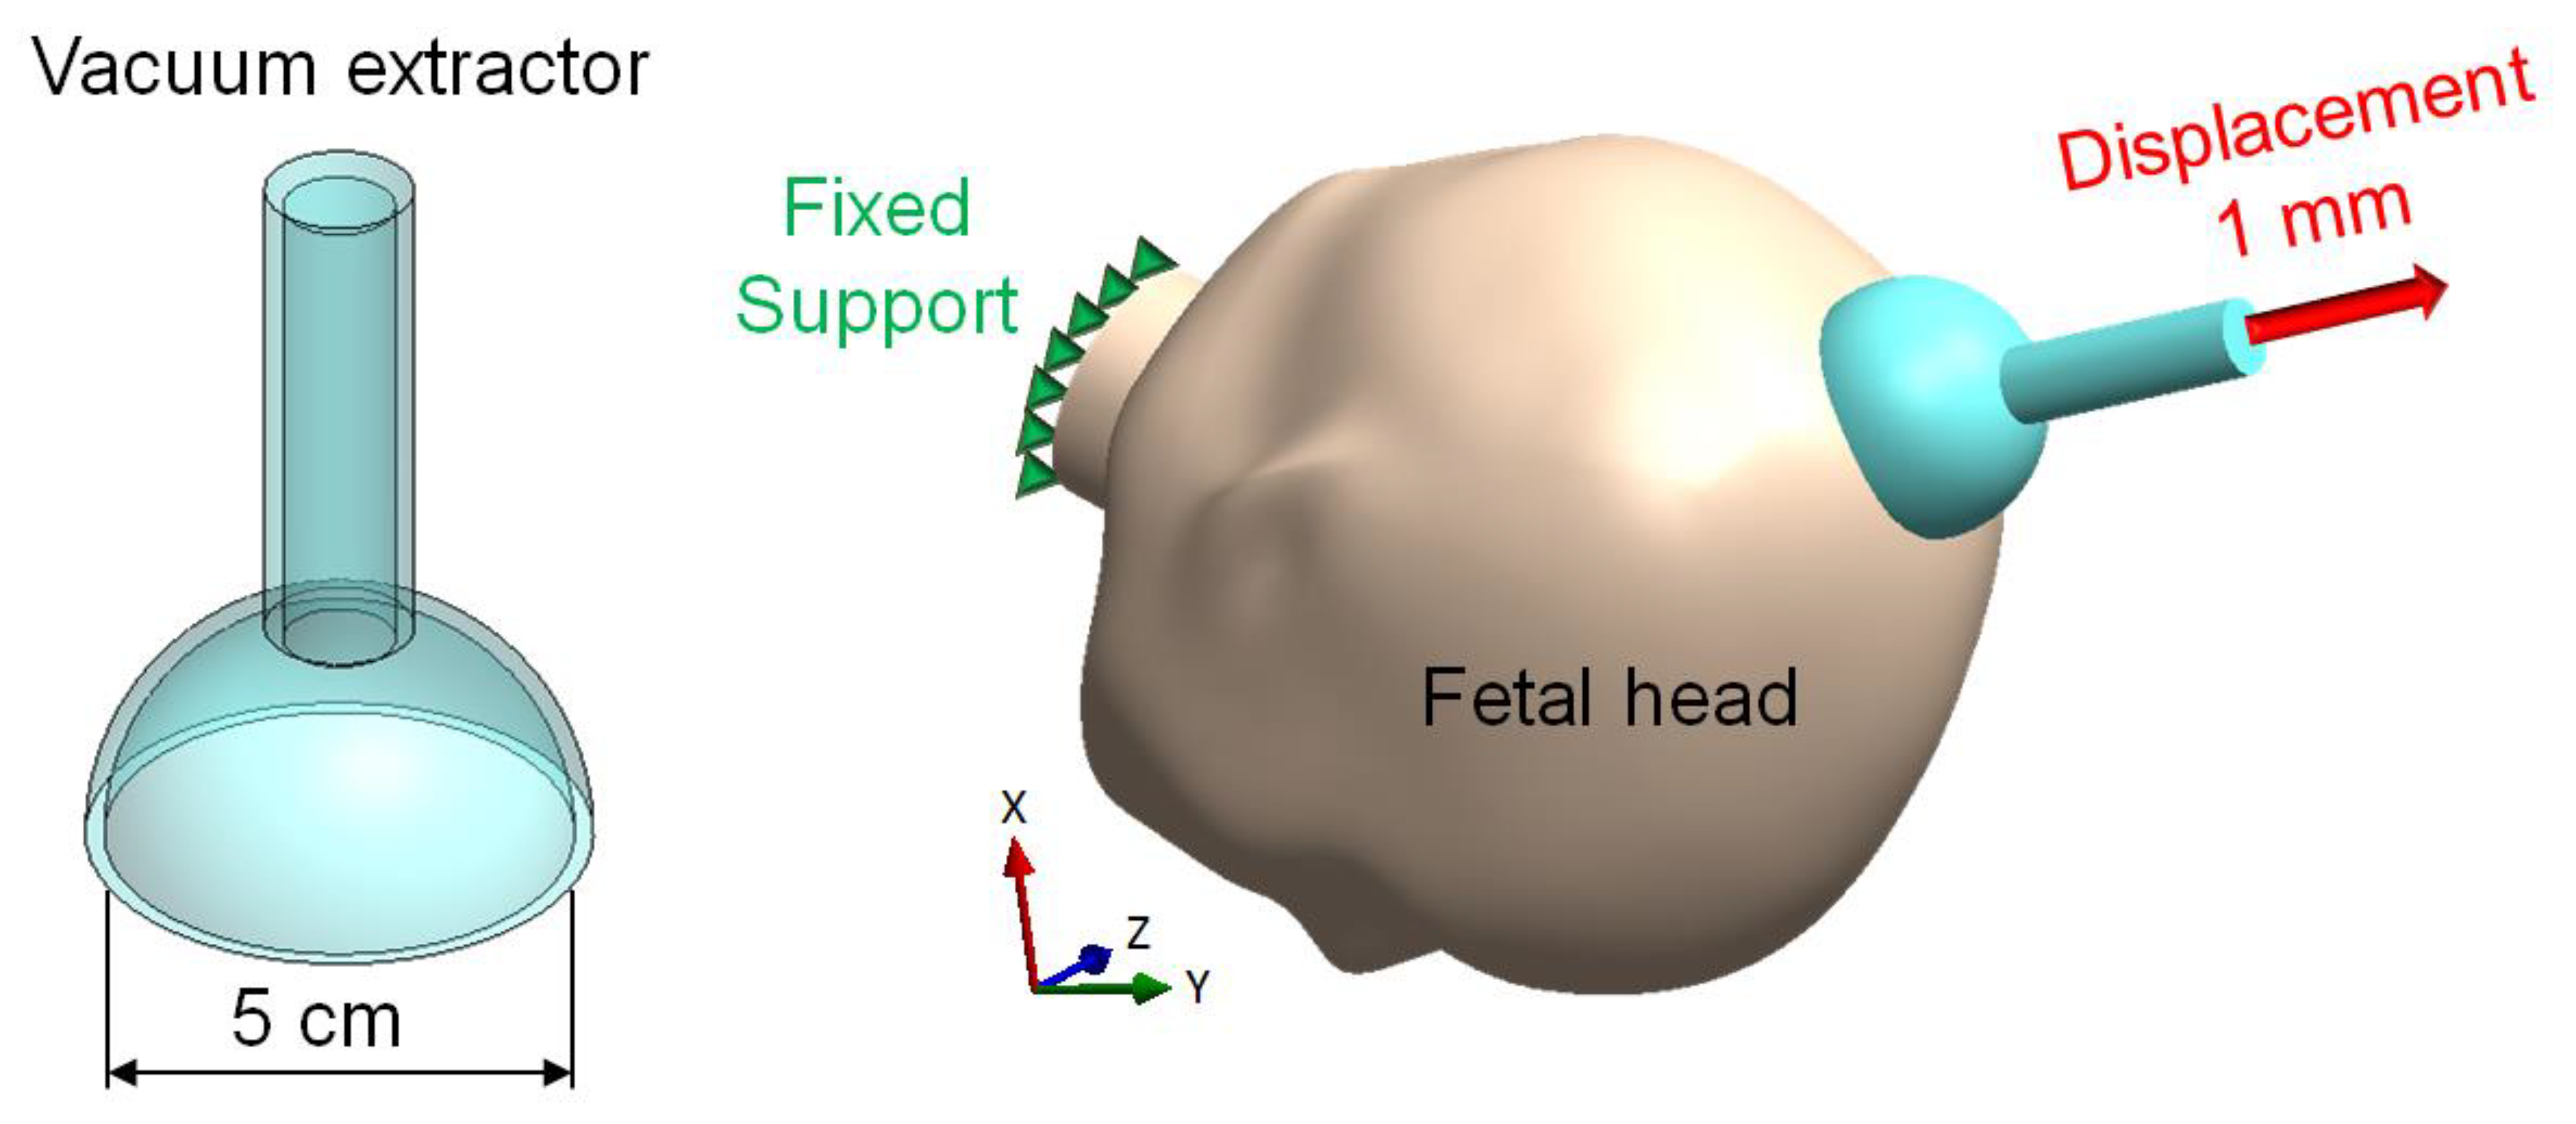 Applied Sciences | Free Full-Text | Investigating the Vacuum Extractors of  Biomedical Devices of Different Materials and Pressures on the Fetal Head  during Delivery